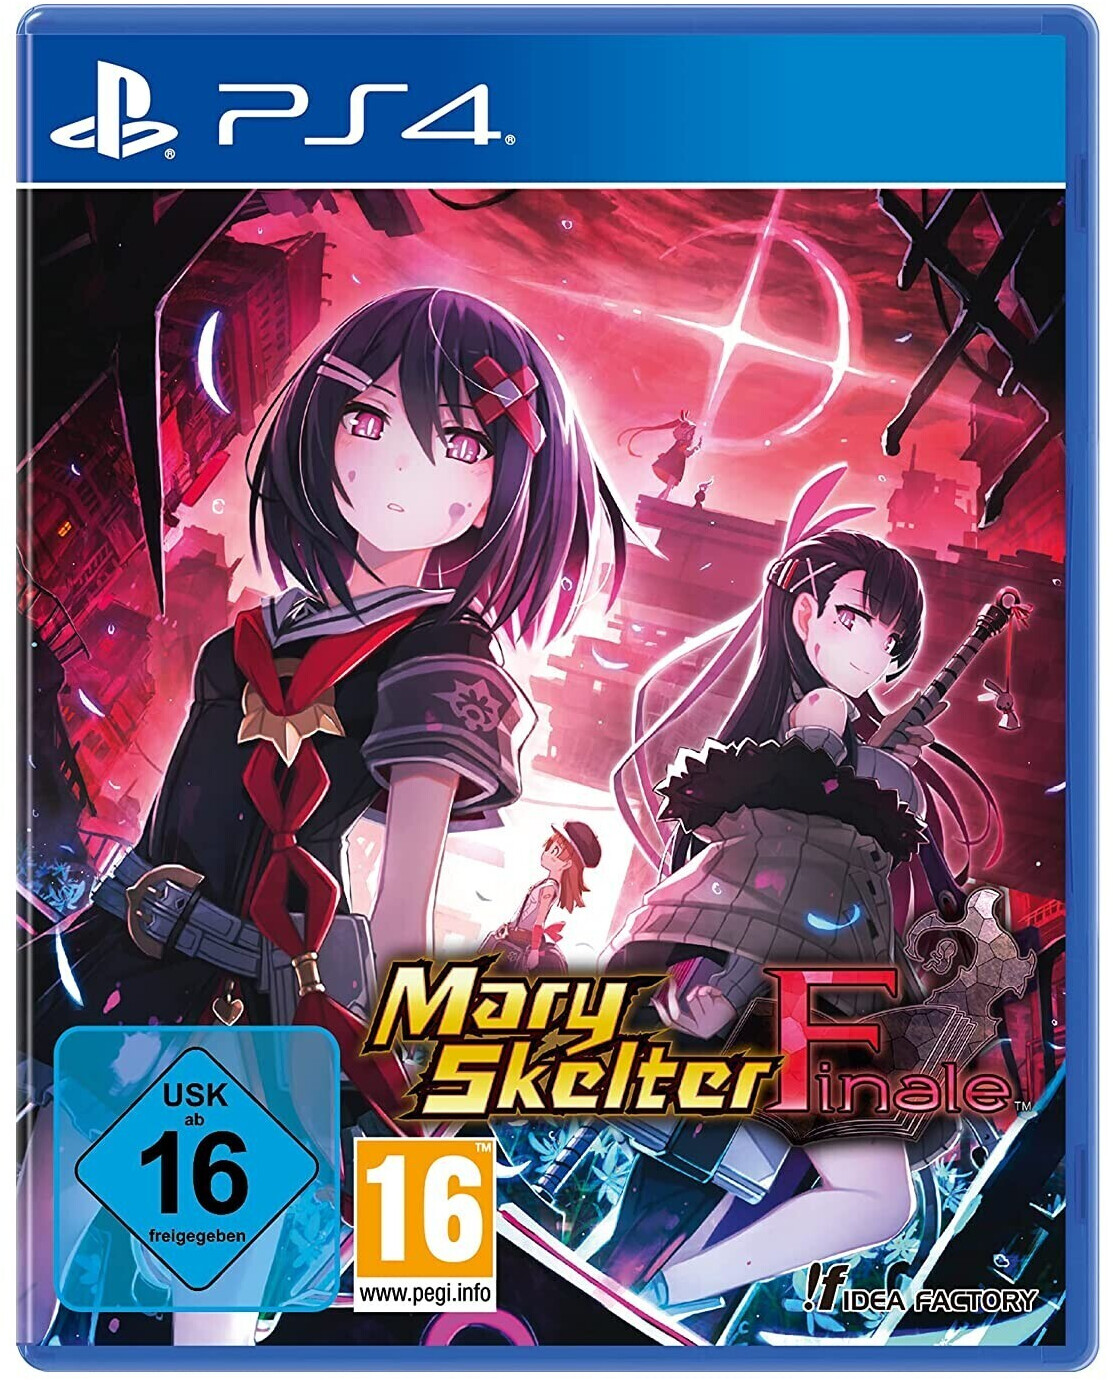 Photos - Game Idea Factory Mary Skelter: Finale (PS4)